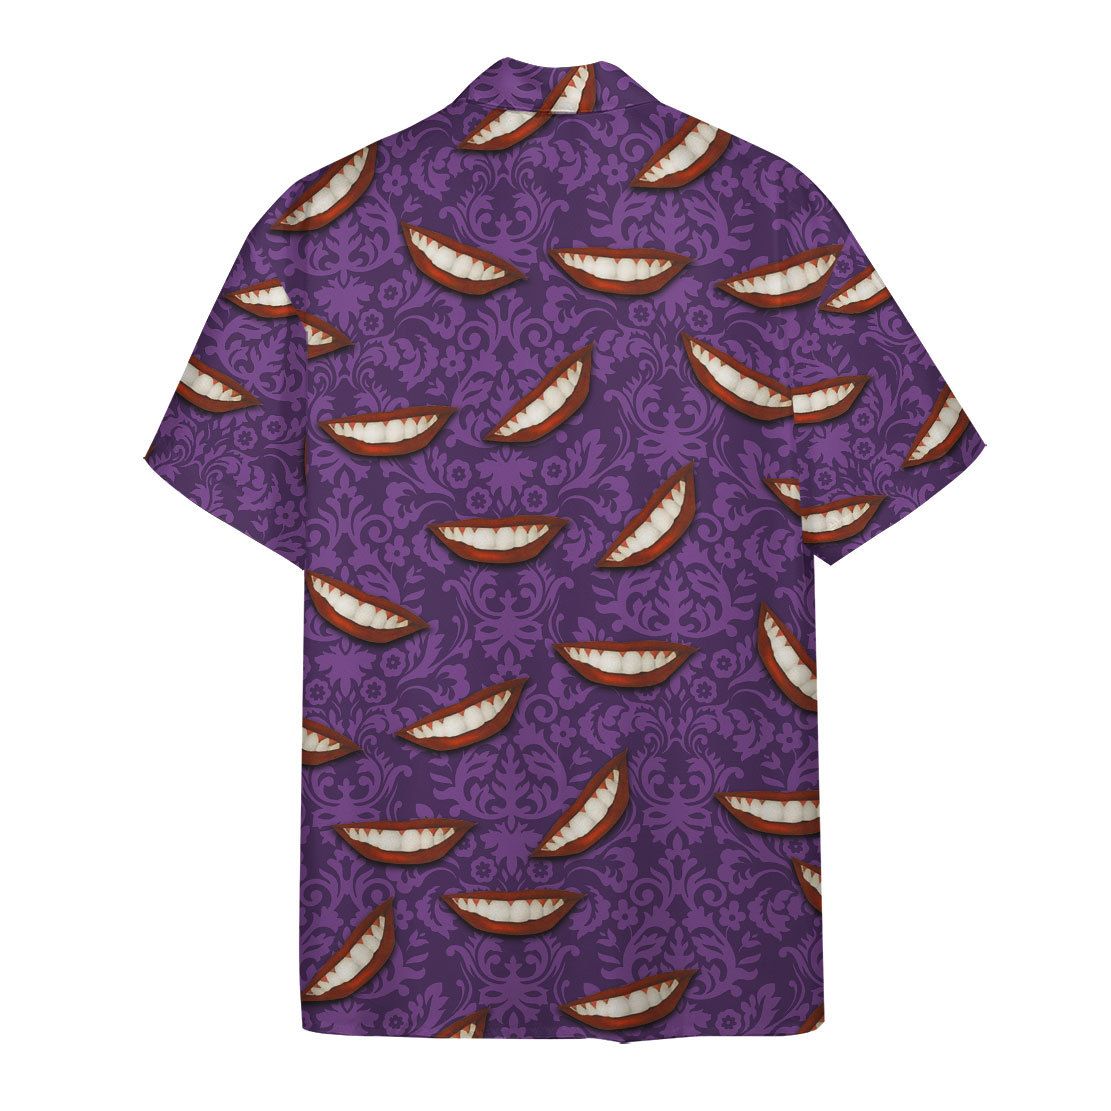 SS Lovely Mouth Hawaii Shirt